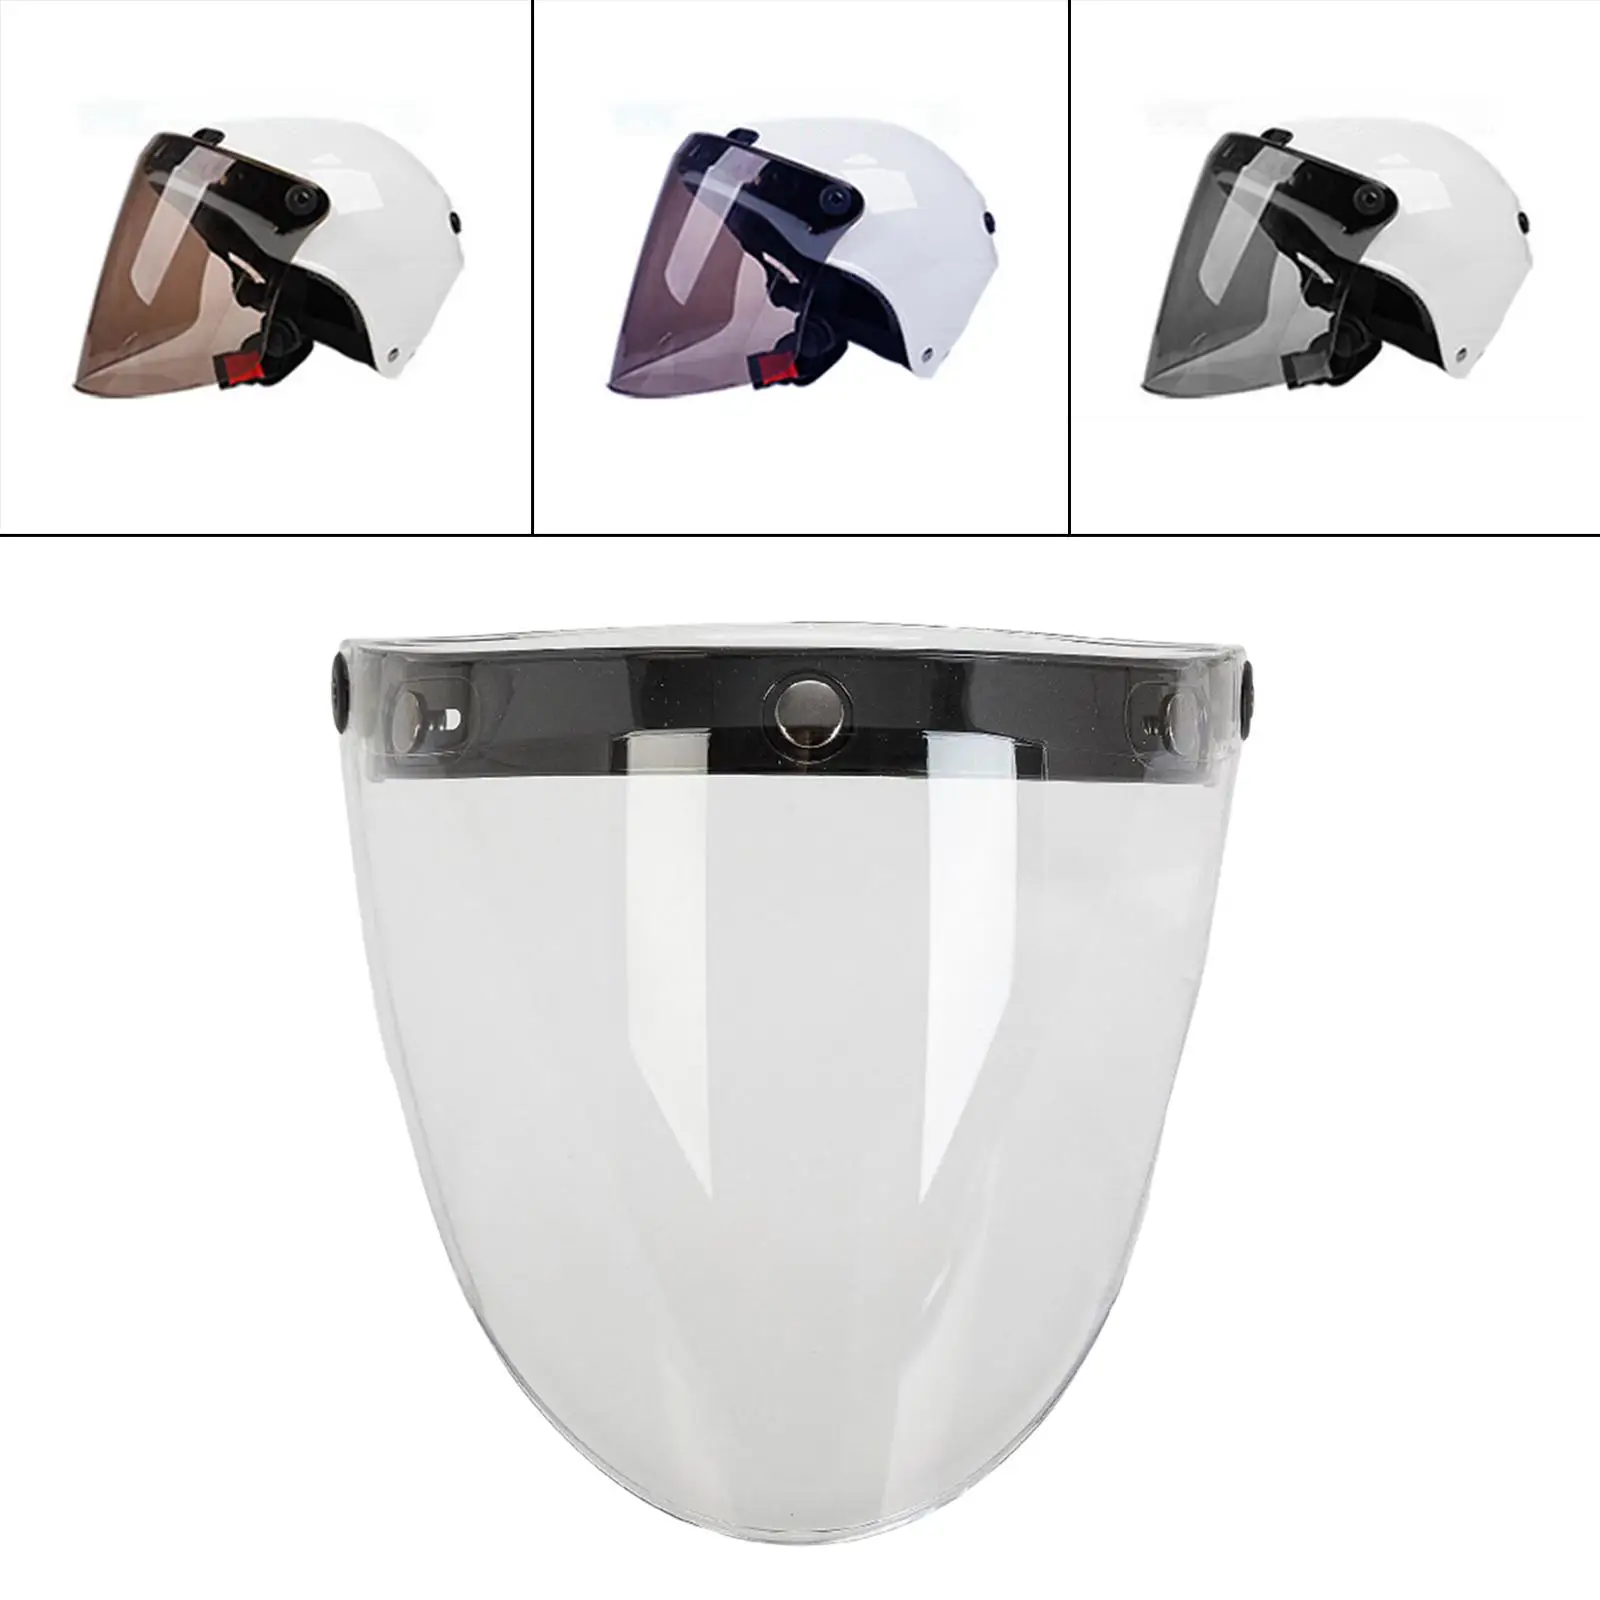 Motorcycle  Visor High Strength PC  Retro Windproof  Fits Snap Easy to Install Professional